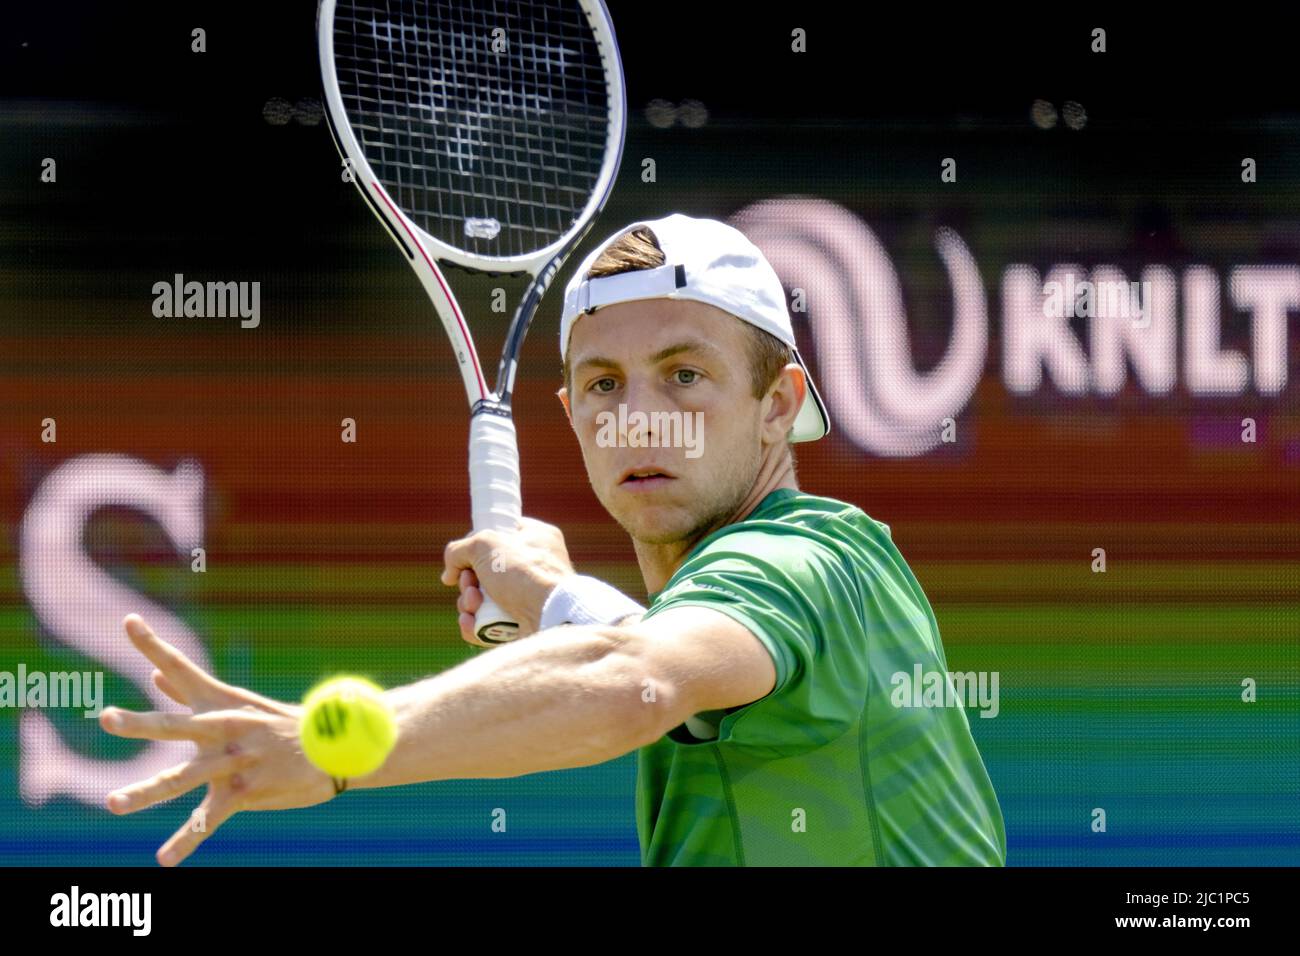 s-Hertogenbosch, the Netherlands, 09/06/2022, ROSMALEN - Tennis player  Tallon Groet in action against Felix Auger-Aliassime (not in photo, Canada)  at the international tennis tournament Libema Open. The combined Dutch tennis  tournament for